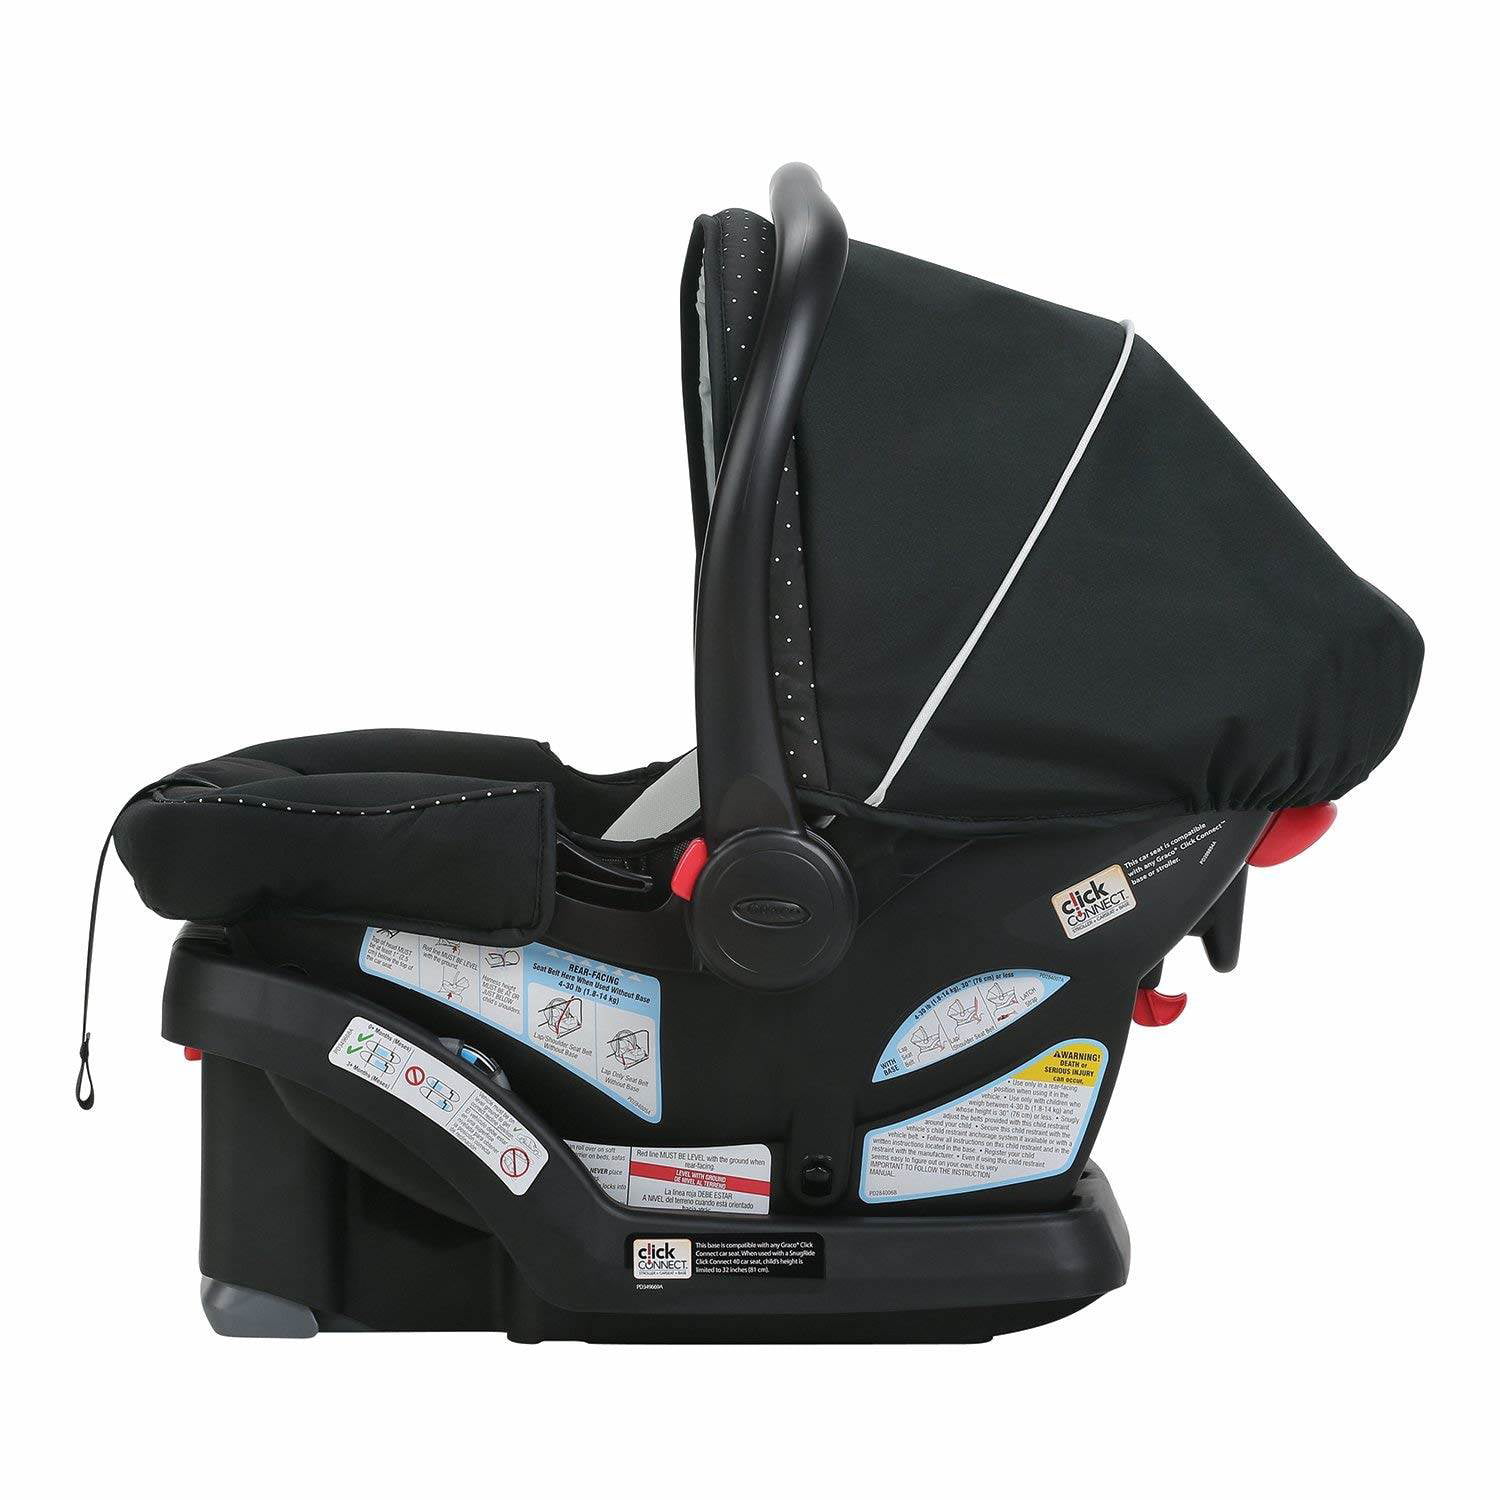 graco stroller compatible with snugride car seat